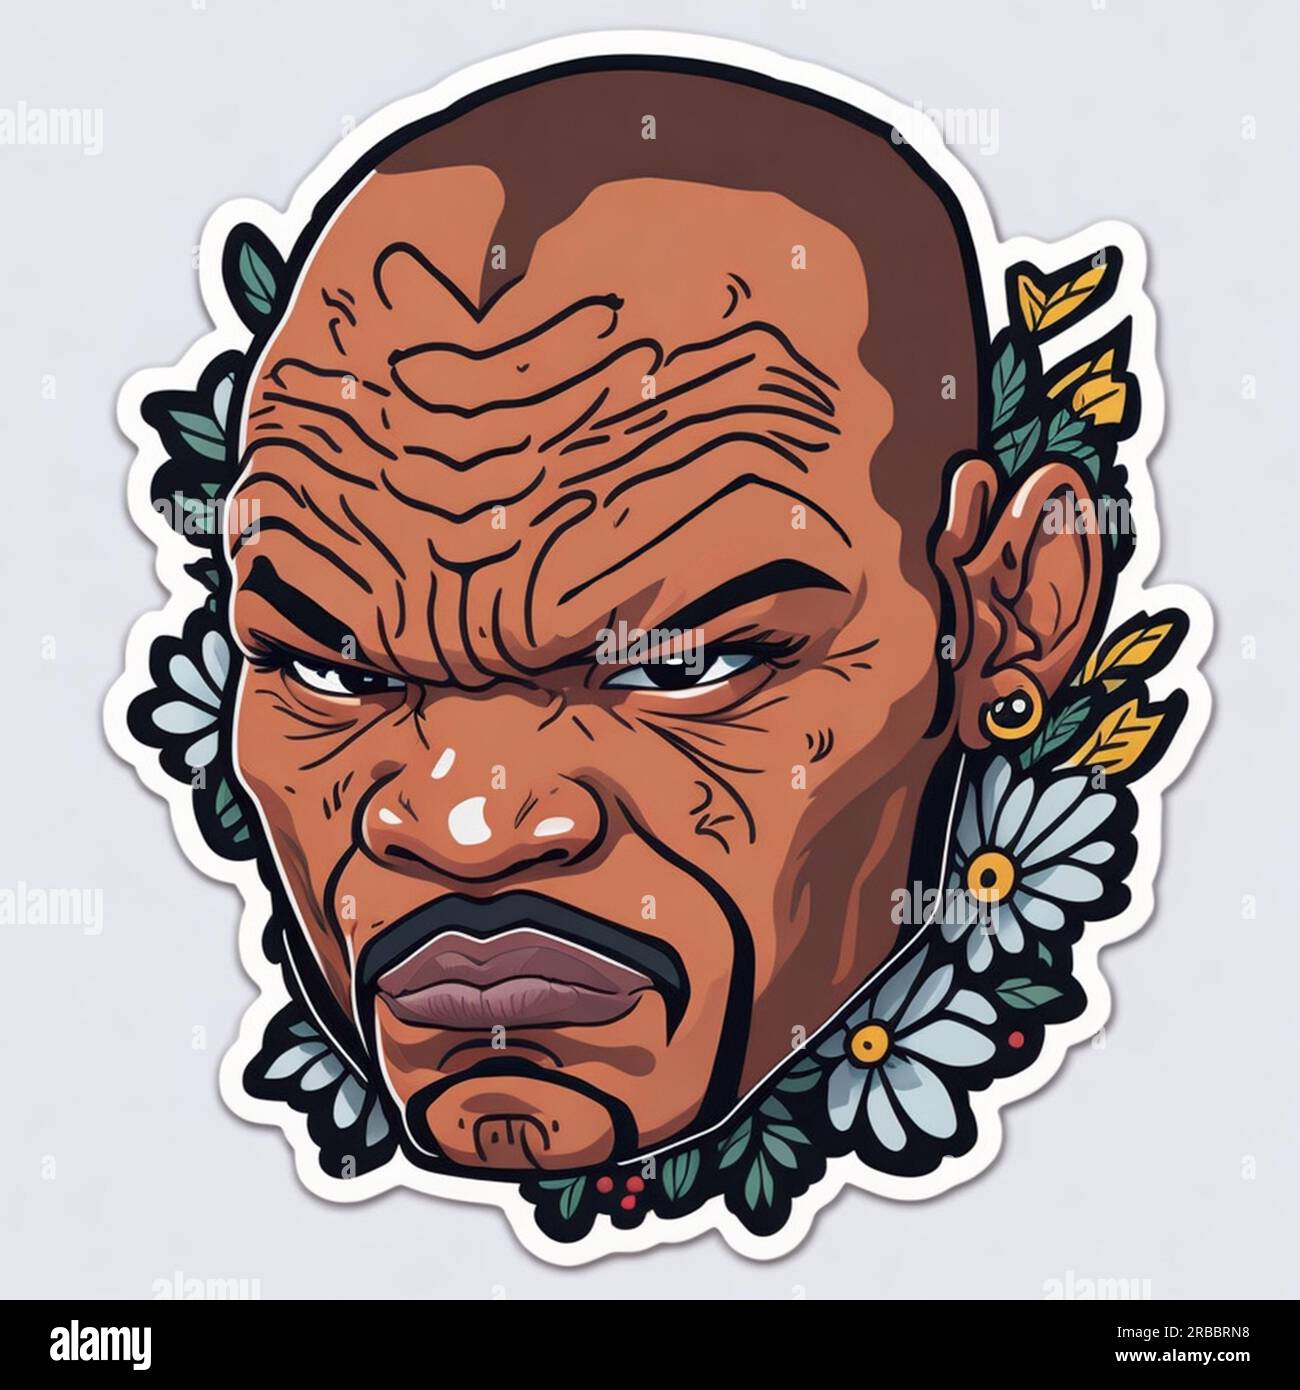 Amazoncom  FashionTats Mike Tyson Tribal Design Temporary Tattoos  4Pack  Plus BONUS Tiger  Bachelor Tattoos  Skin Safe  MADE IN THE  USA  Removable  Beauty  Personal Care